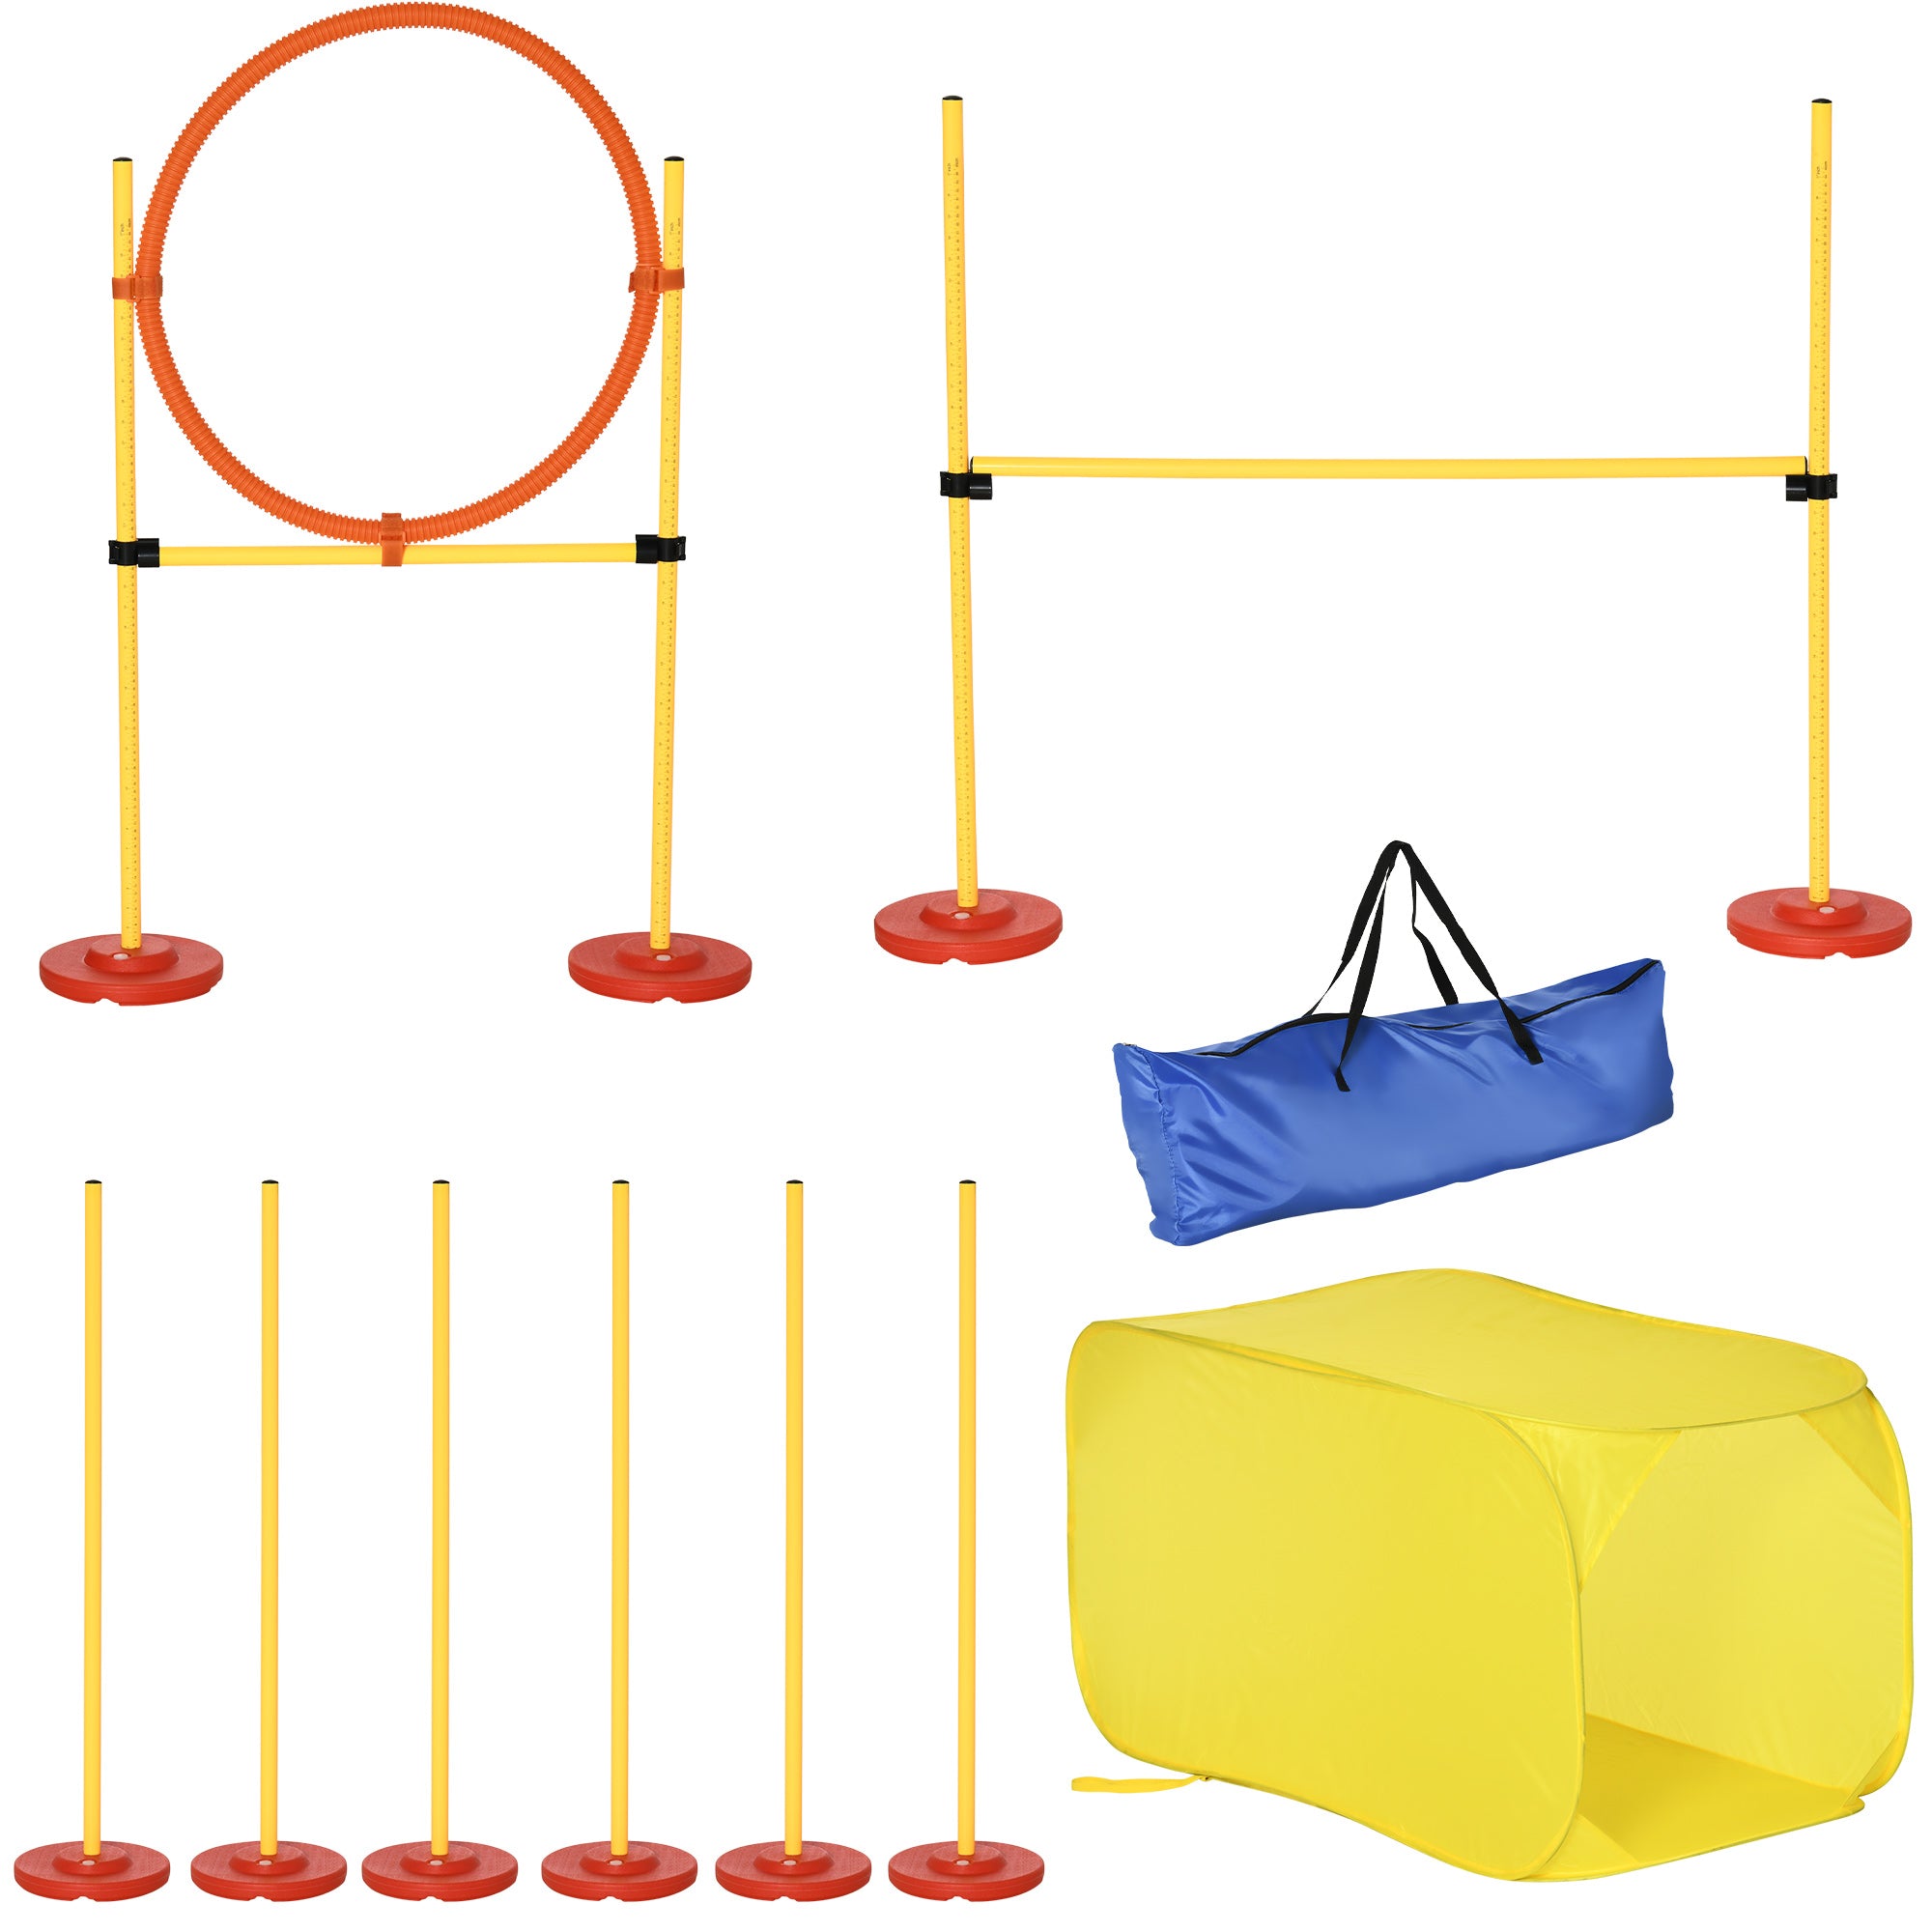 Portable Pet Agility Training Obstacle Set for Dogs w/ Adjustable High Jumping Pole, Jumping Ring, Turnstile poles, Tunnel, PawHut,